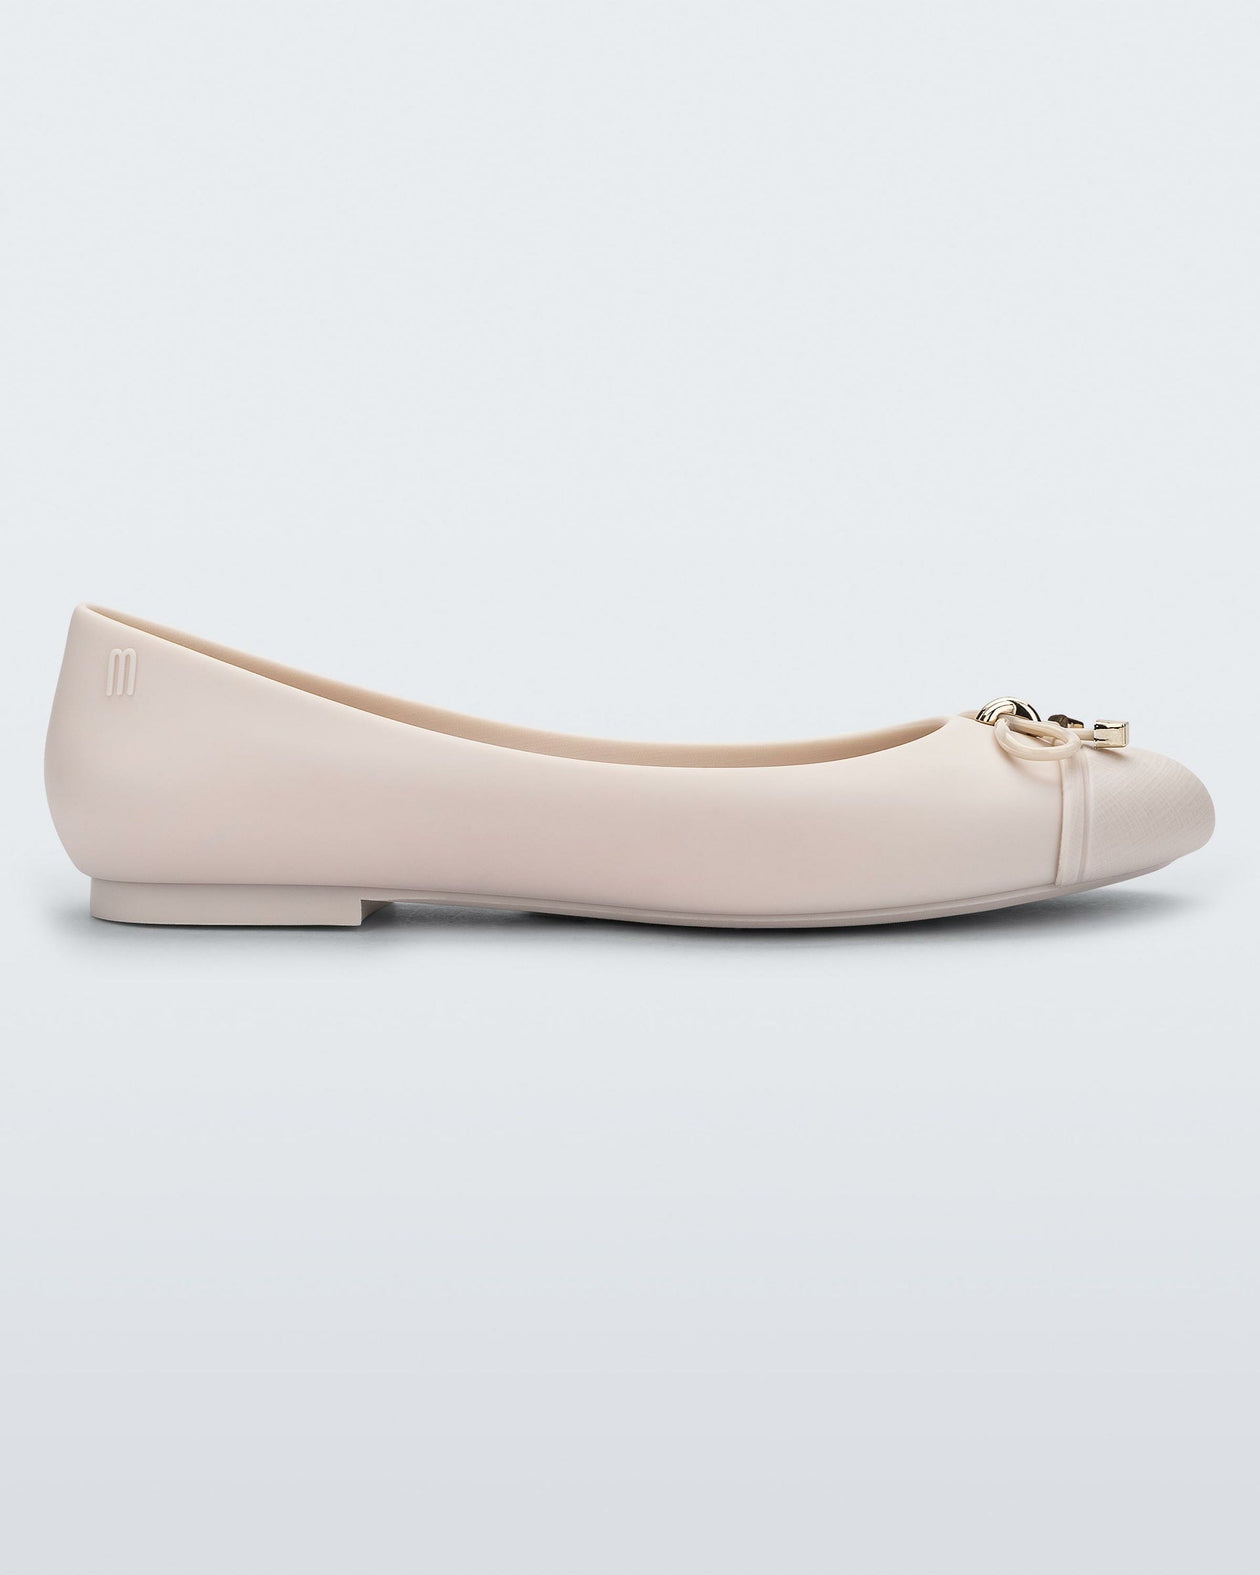 Side view of a light beige Melissa flat with a beige bow detail with gold accents on the toe